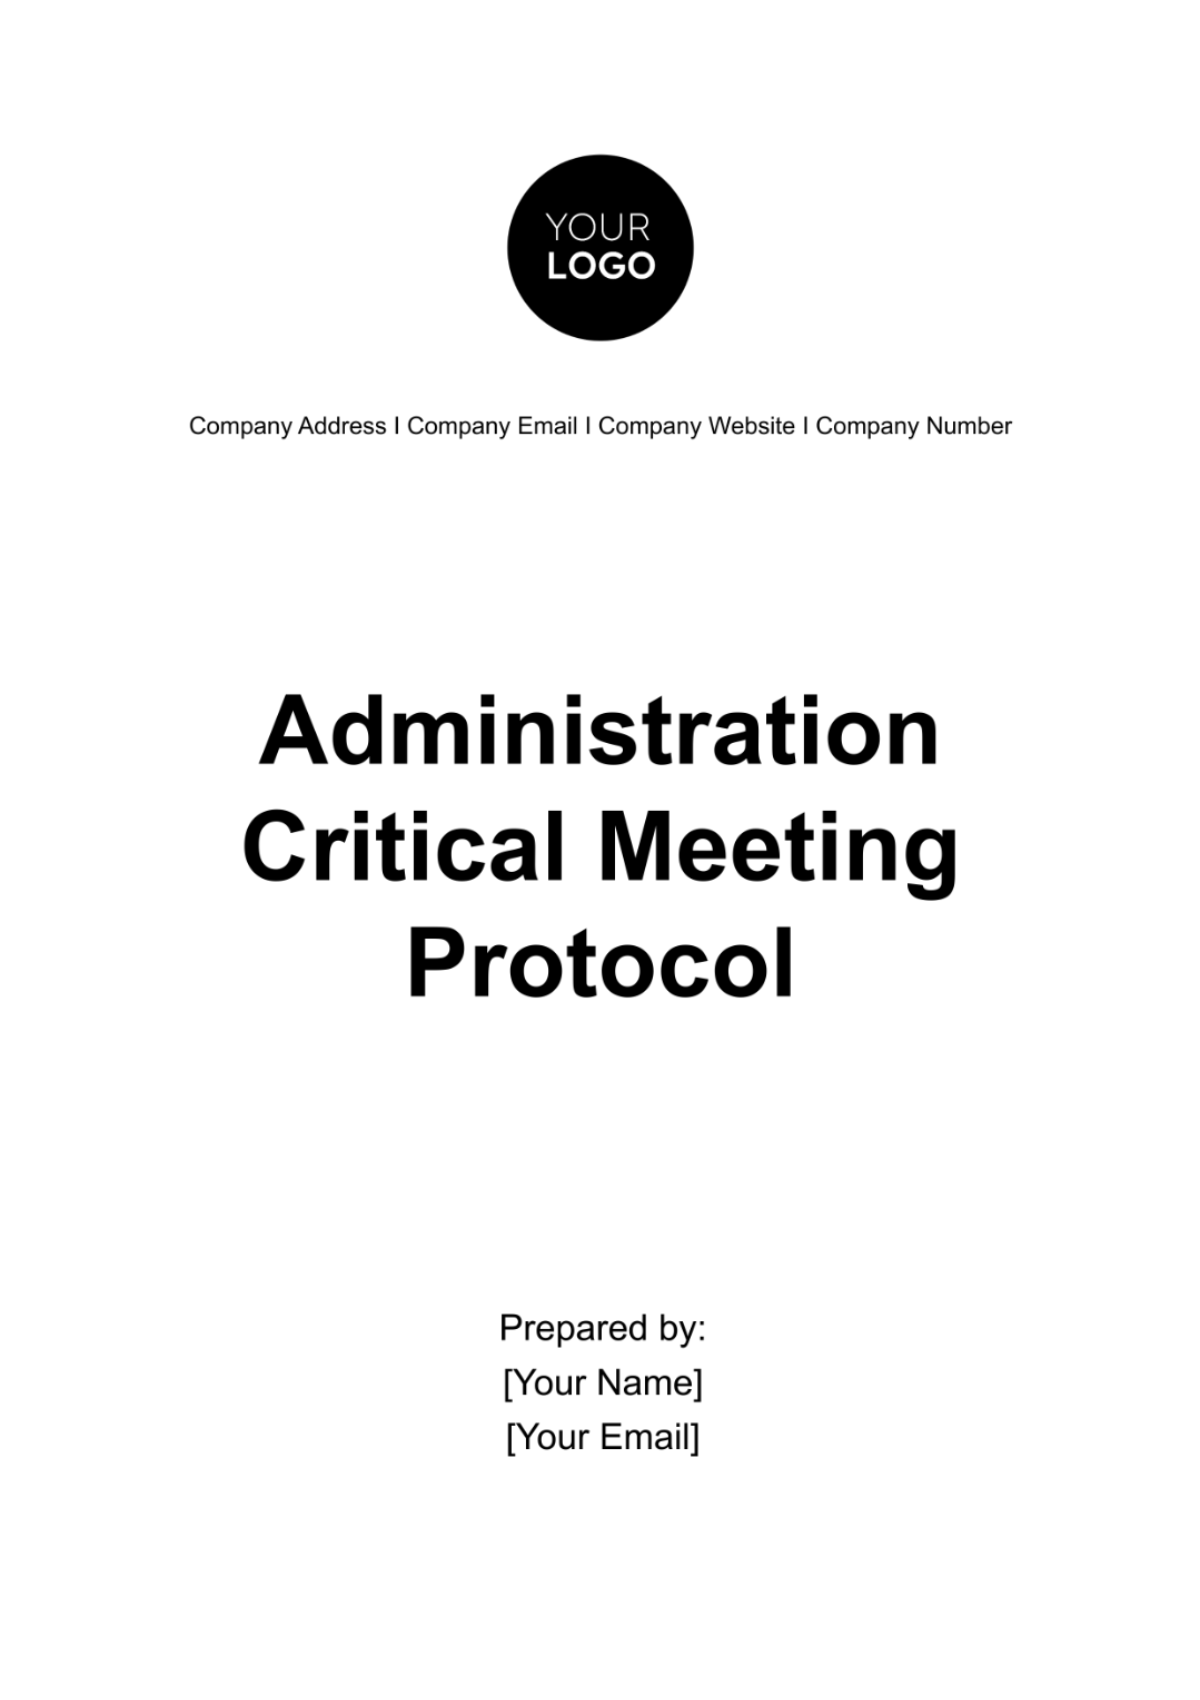 Free Administration Critical Meeting Protocol Template